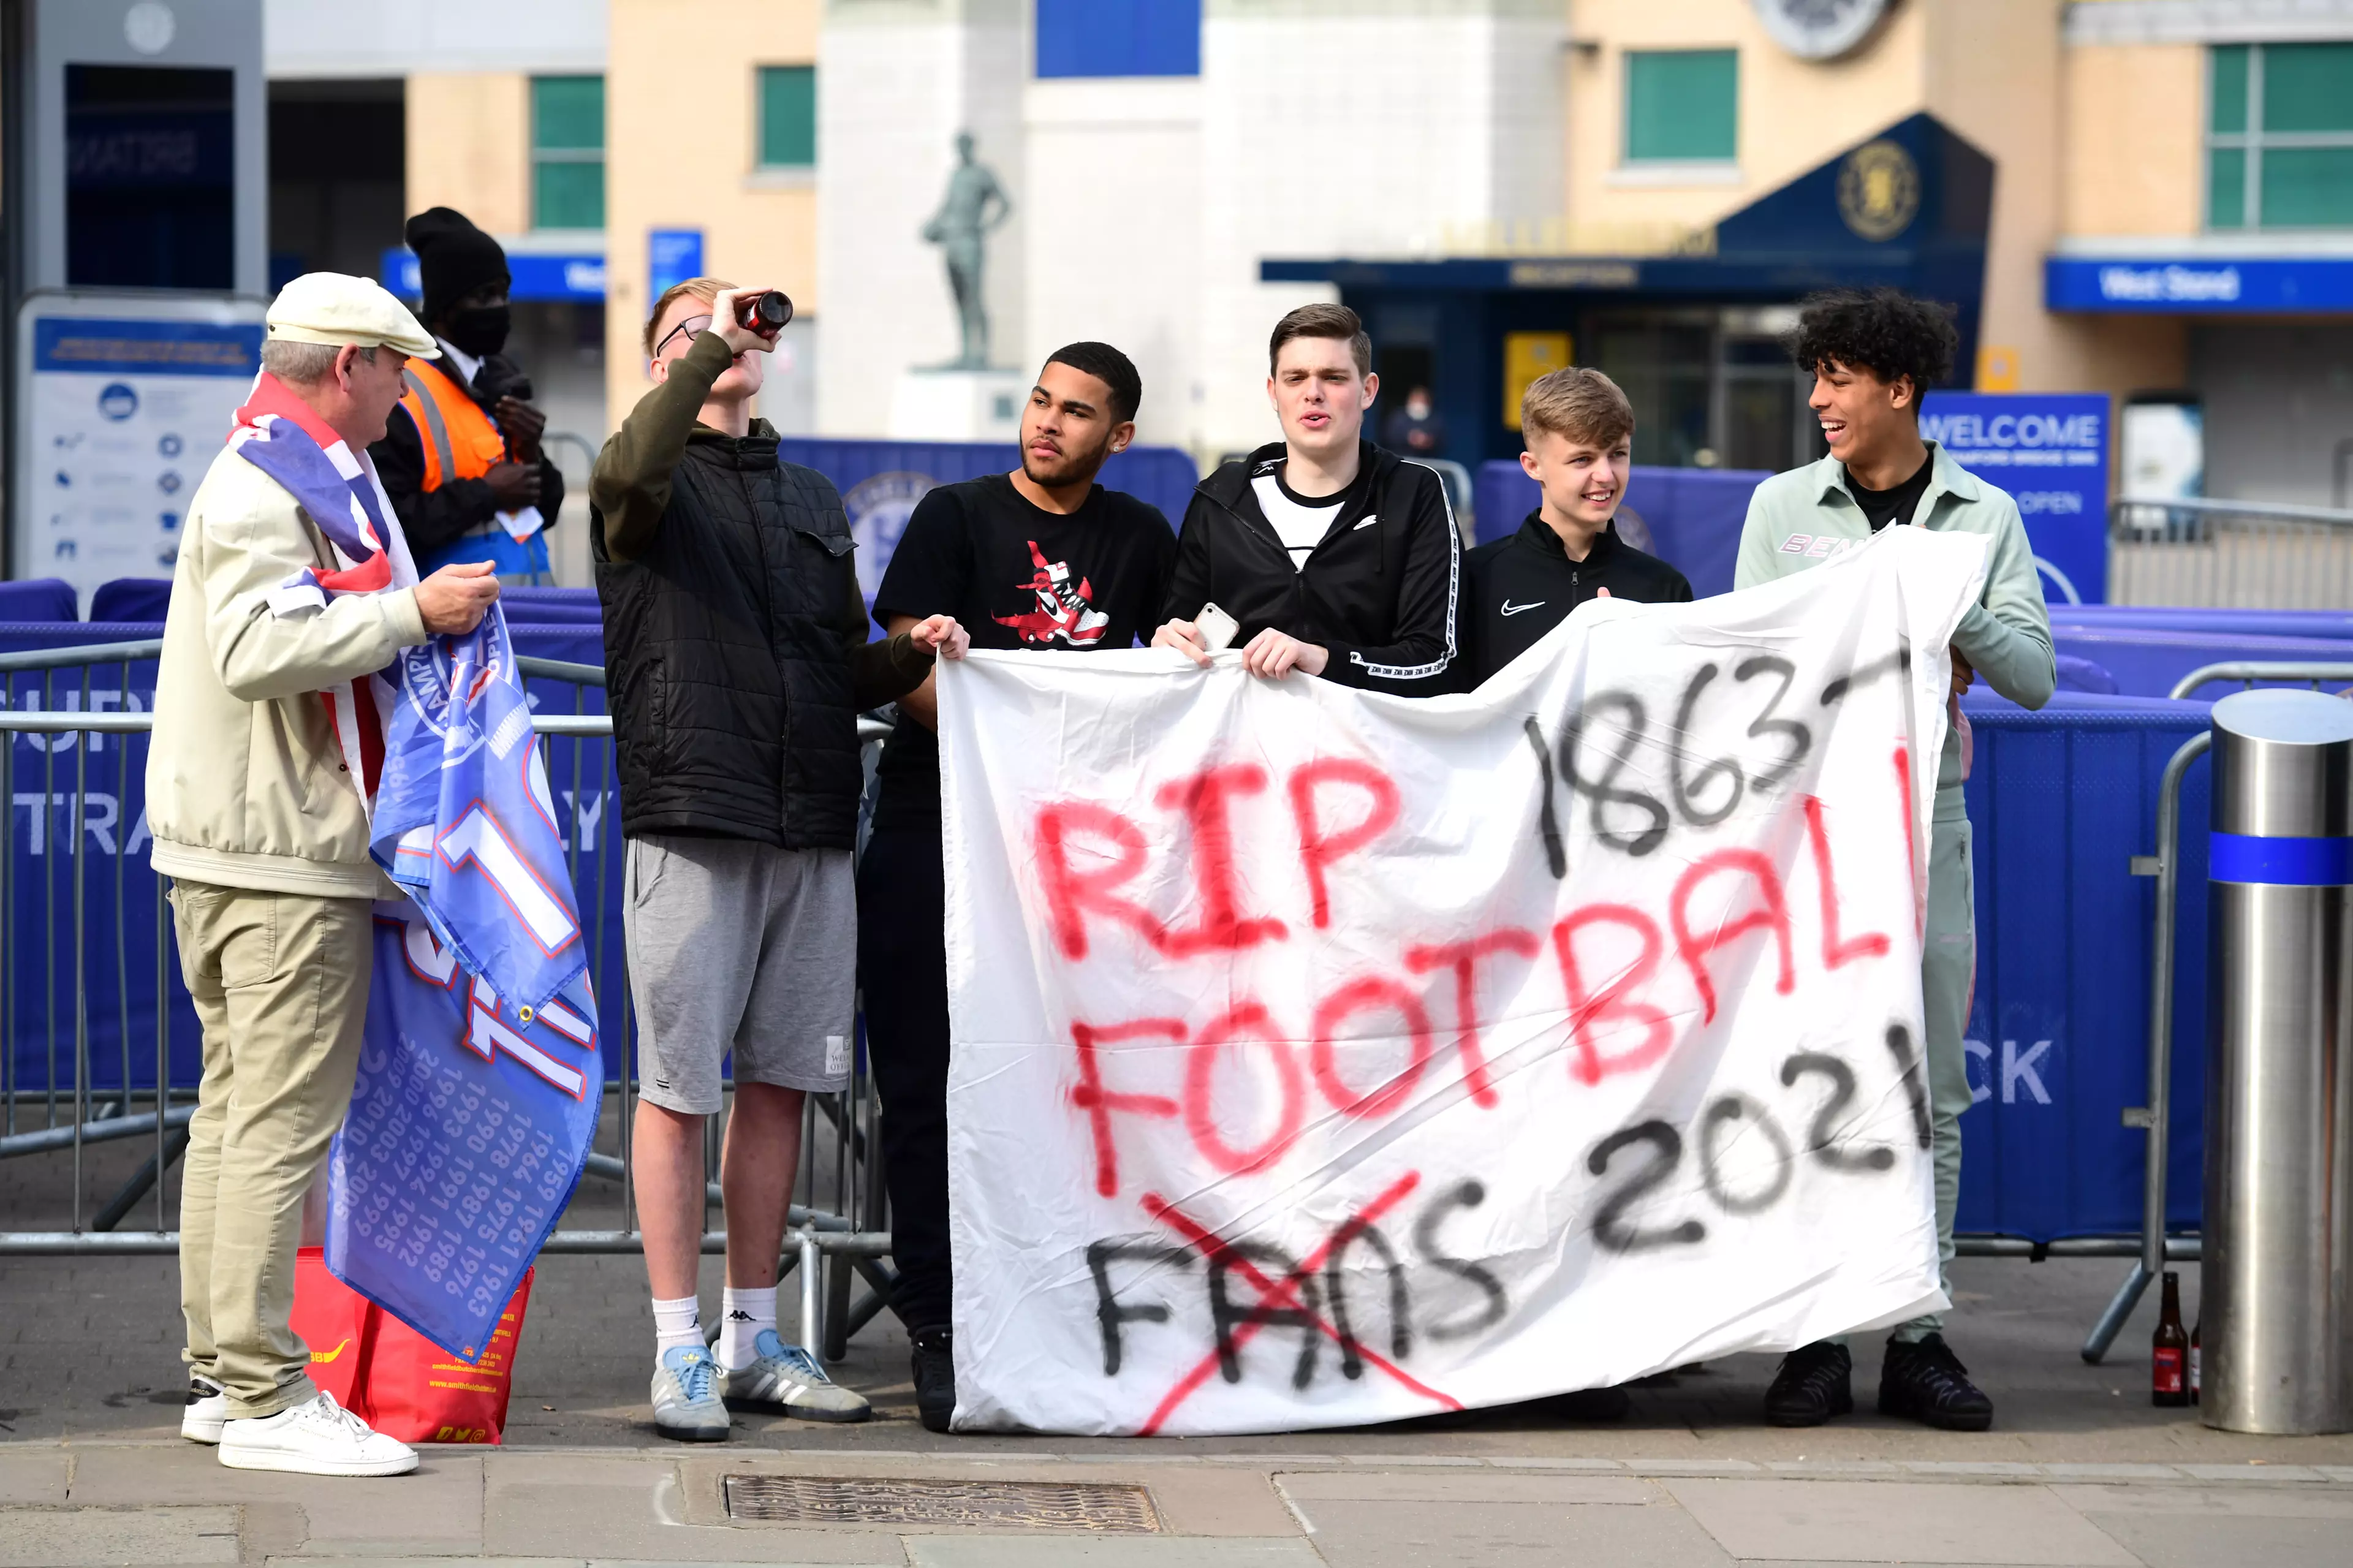 Fans protested against the Super League outside of Stamford Bridge. Image: PA Images